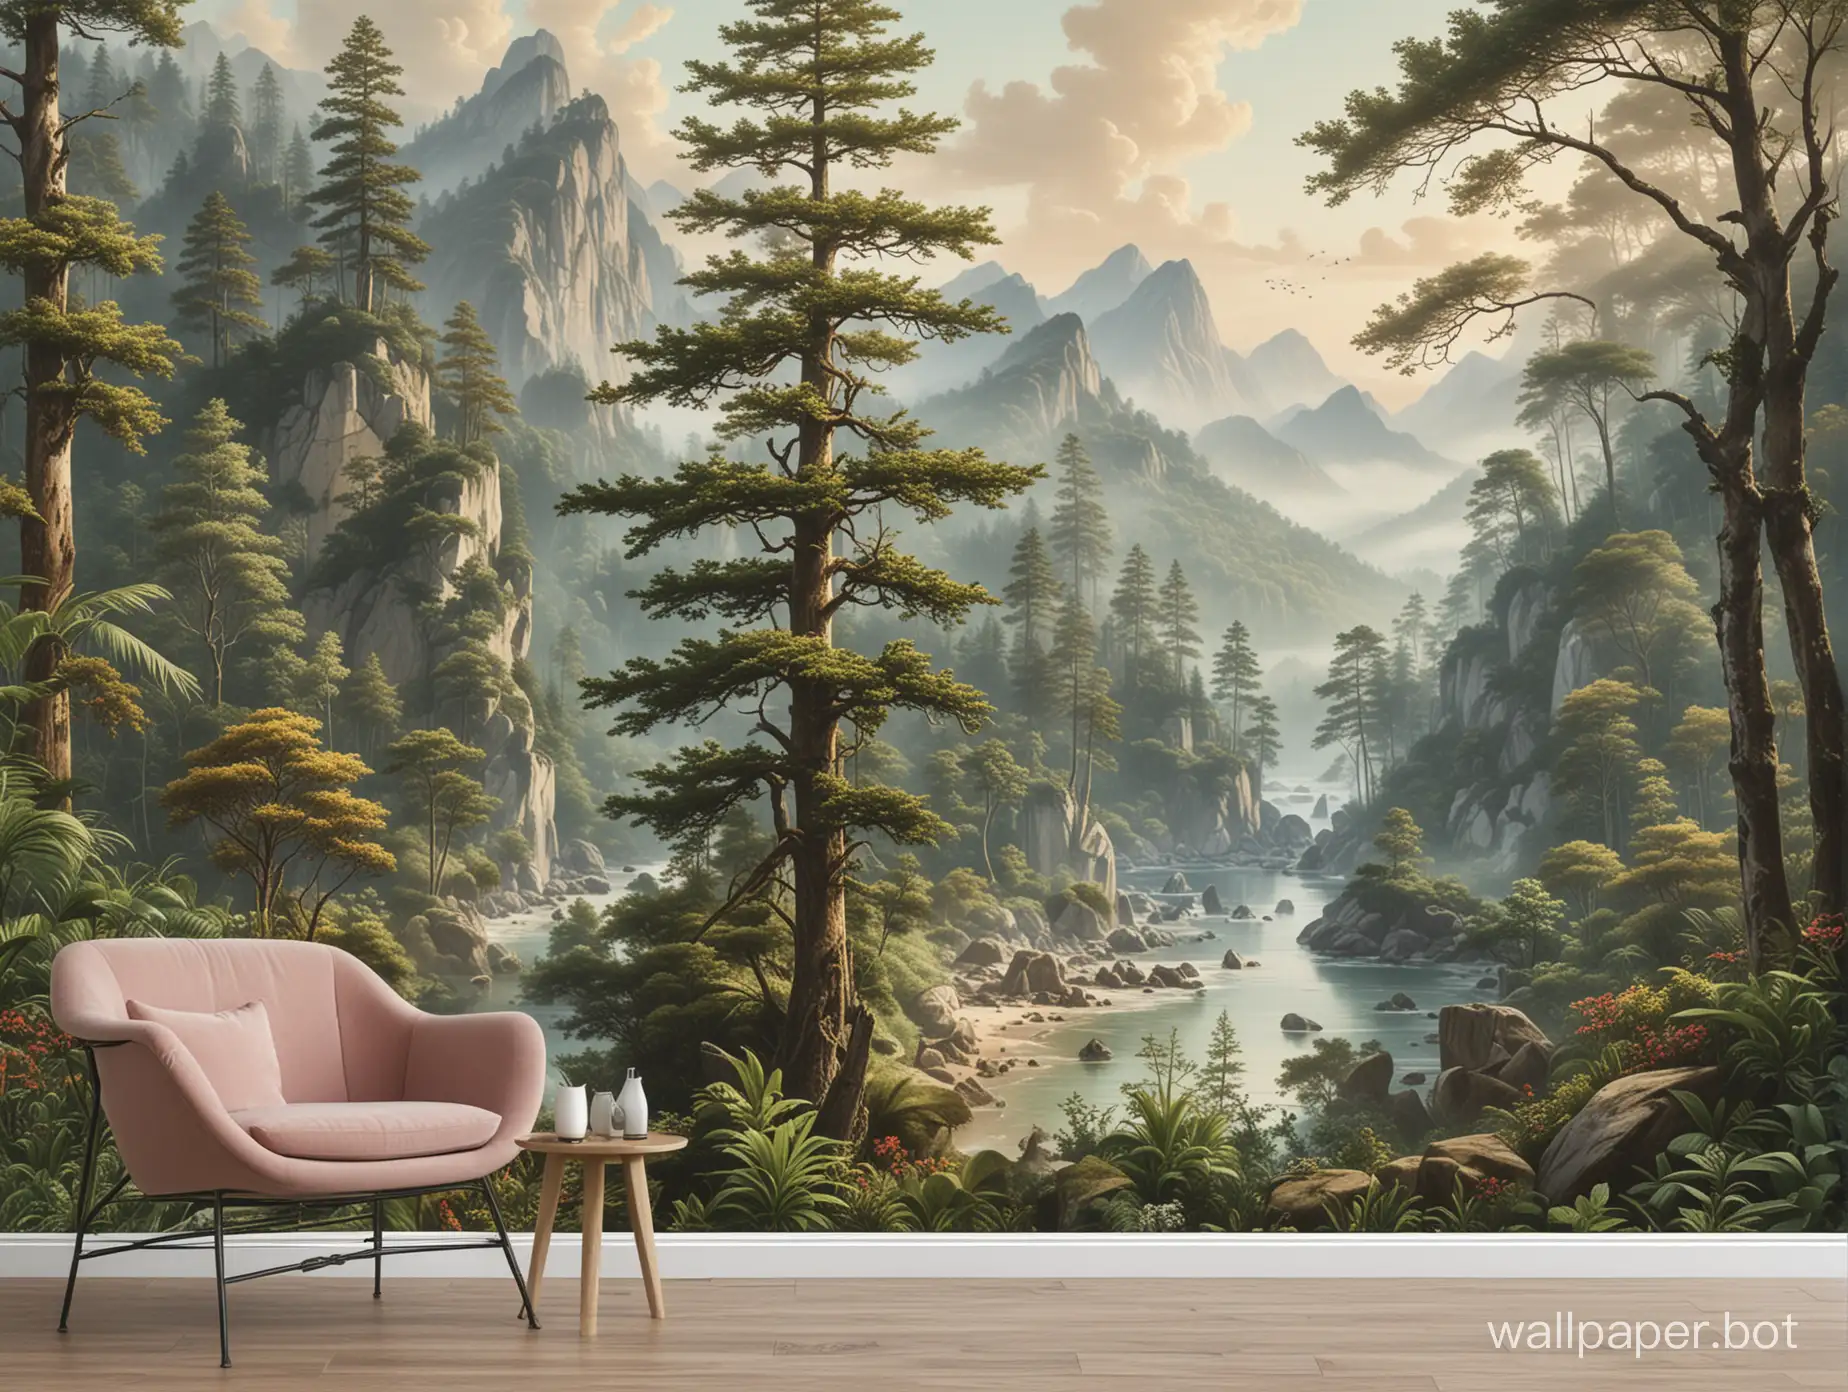 Indulge in the tranquil beauty of nature with our exquisite collection of wallpapers. Each image captures the raw essence of the natural world, transporting you to lush forests, majestic mountains, and serene seascapes.